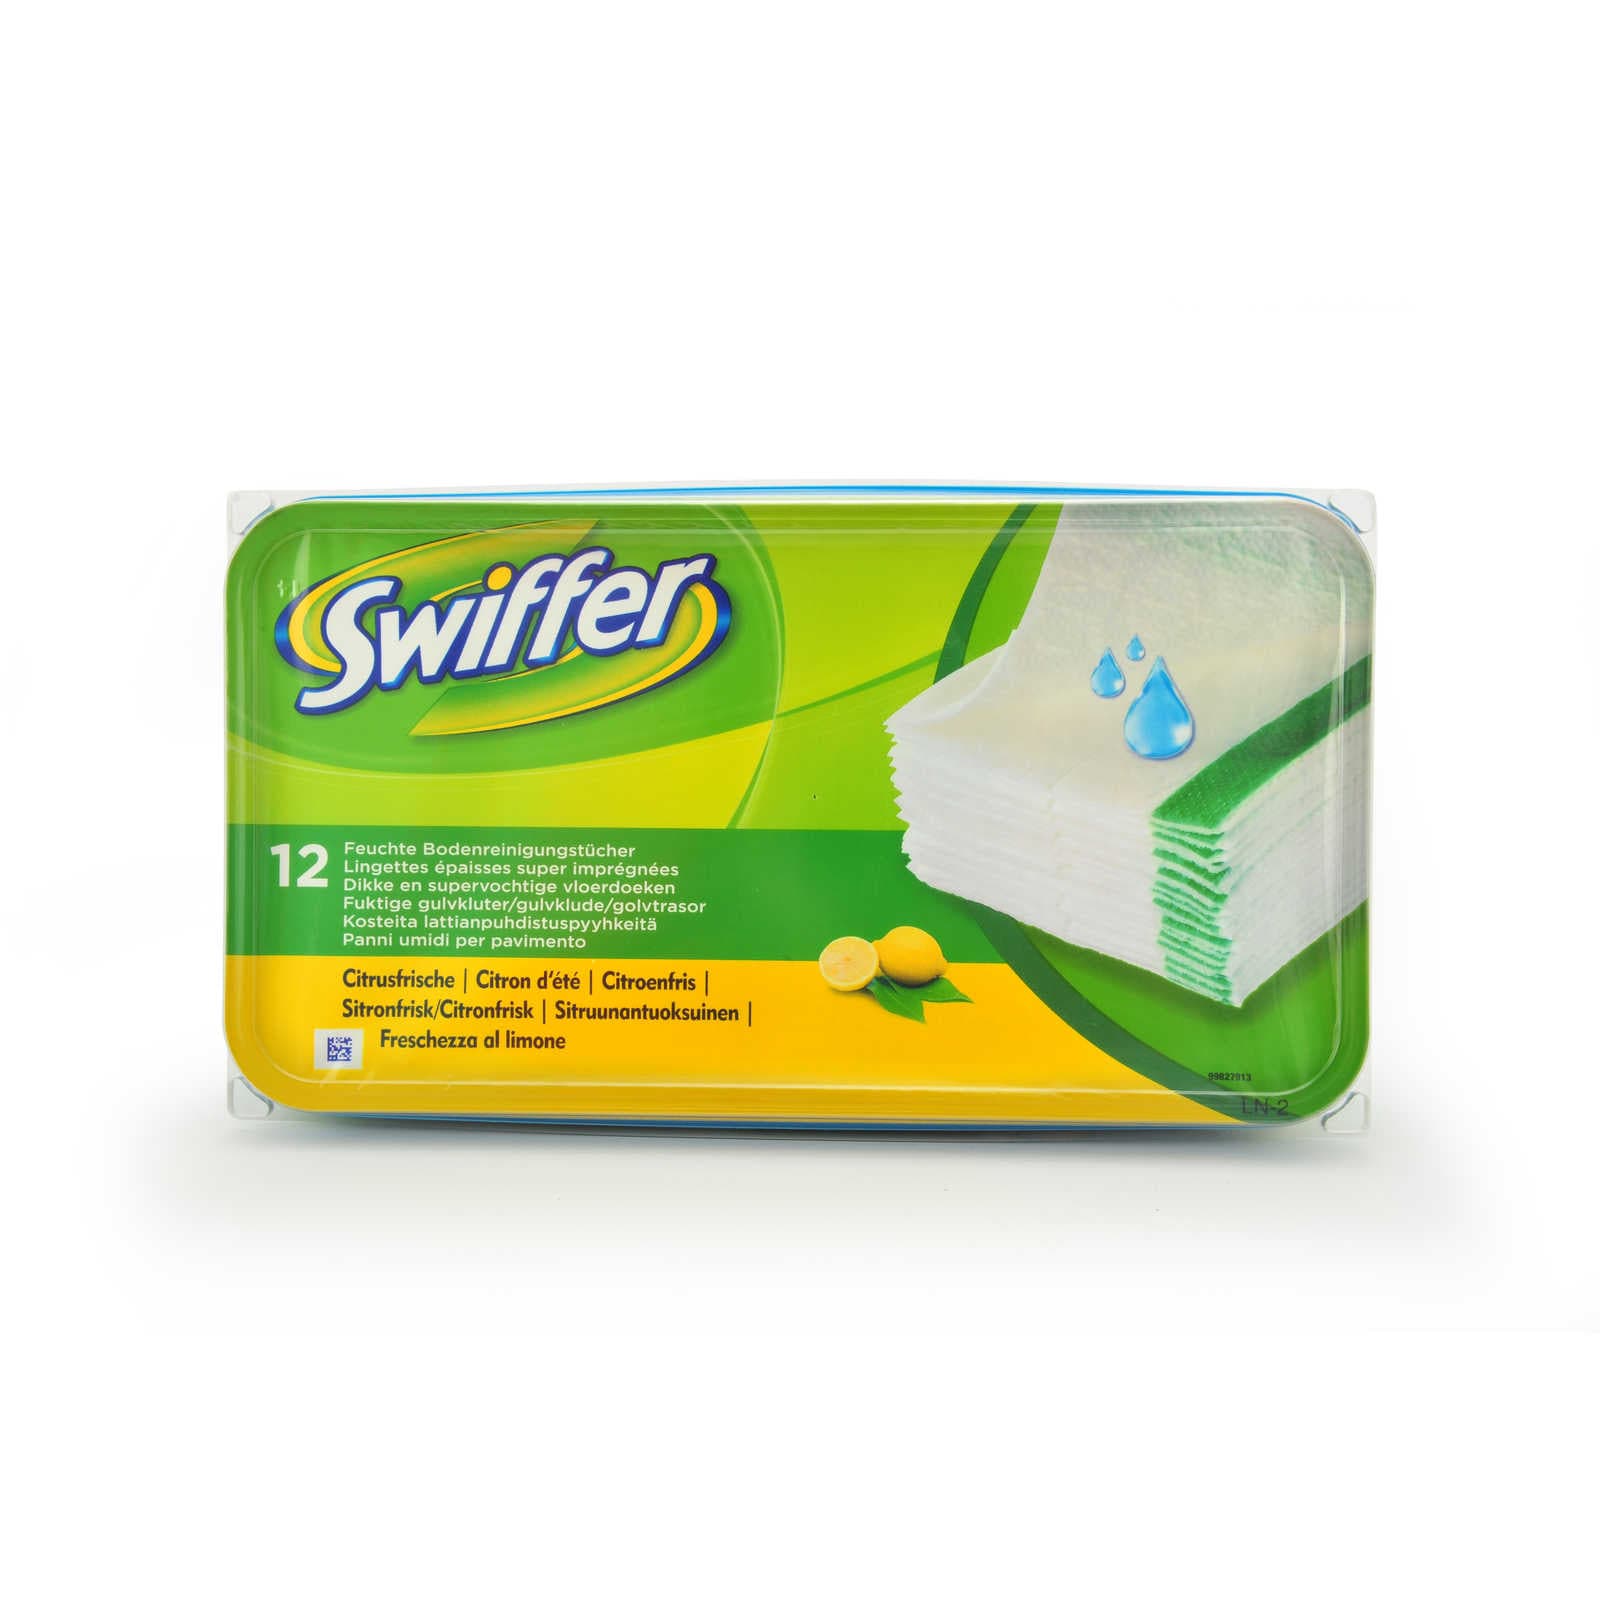 Swiffer, 12 Lingettes, Humide, Taches difficiles, 1+1, 24 pc